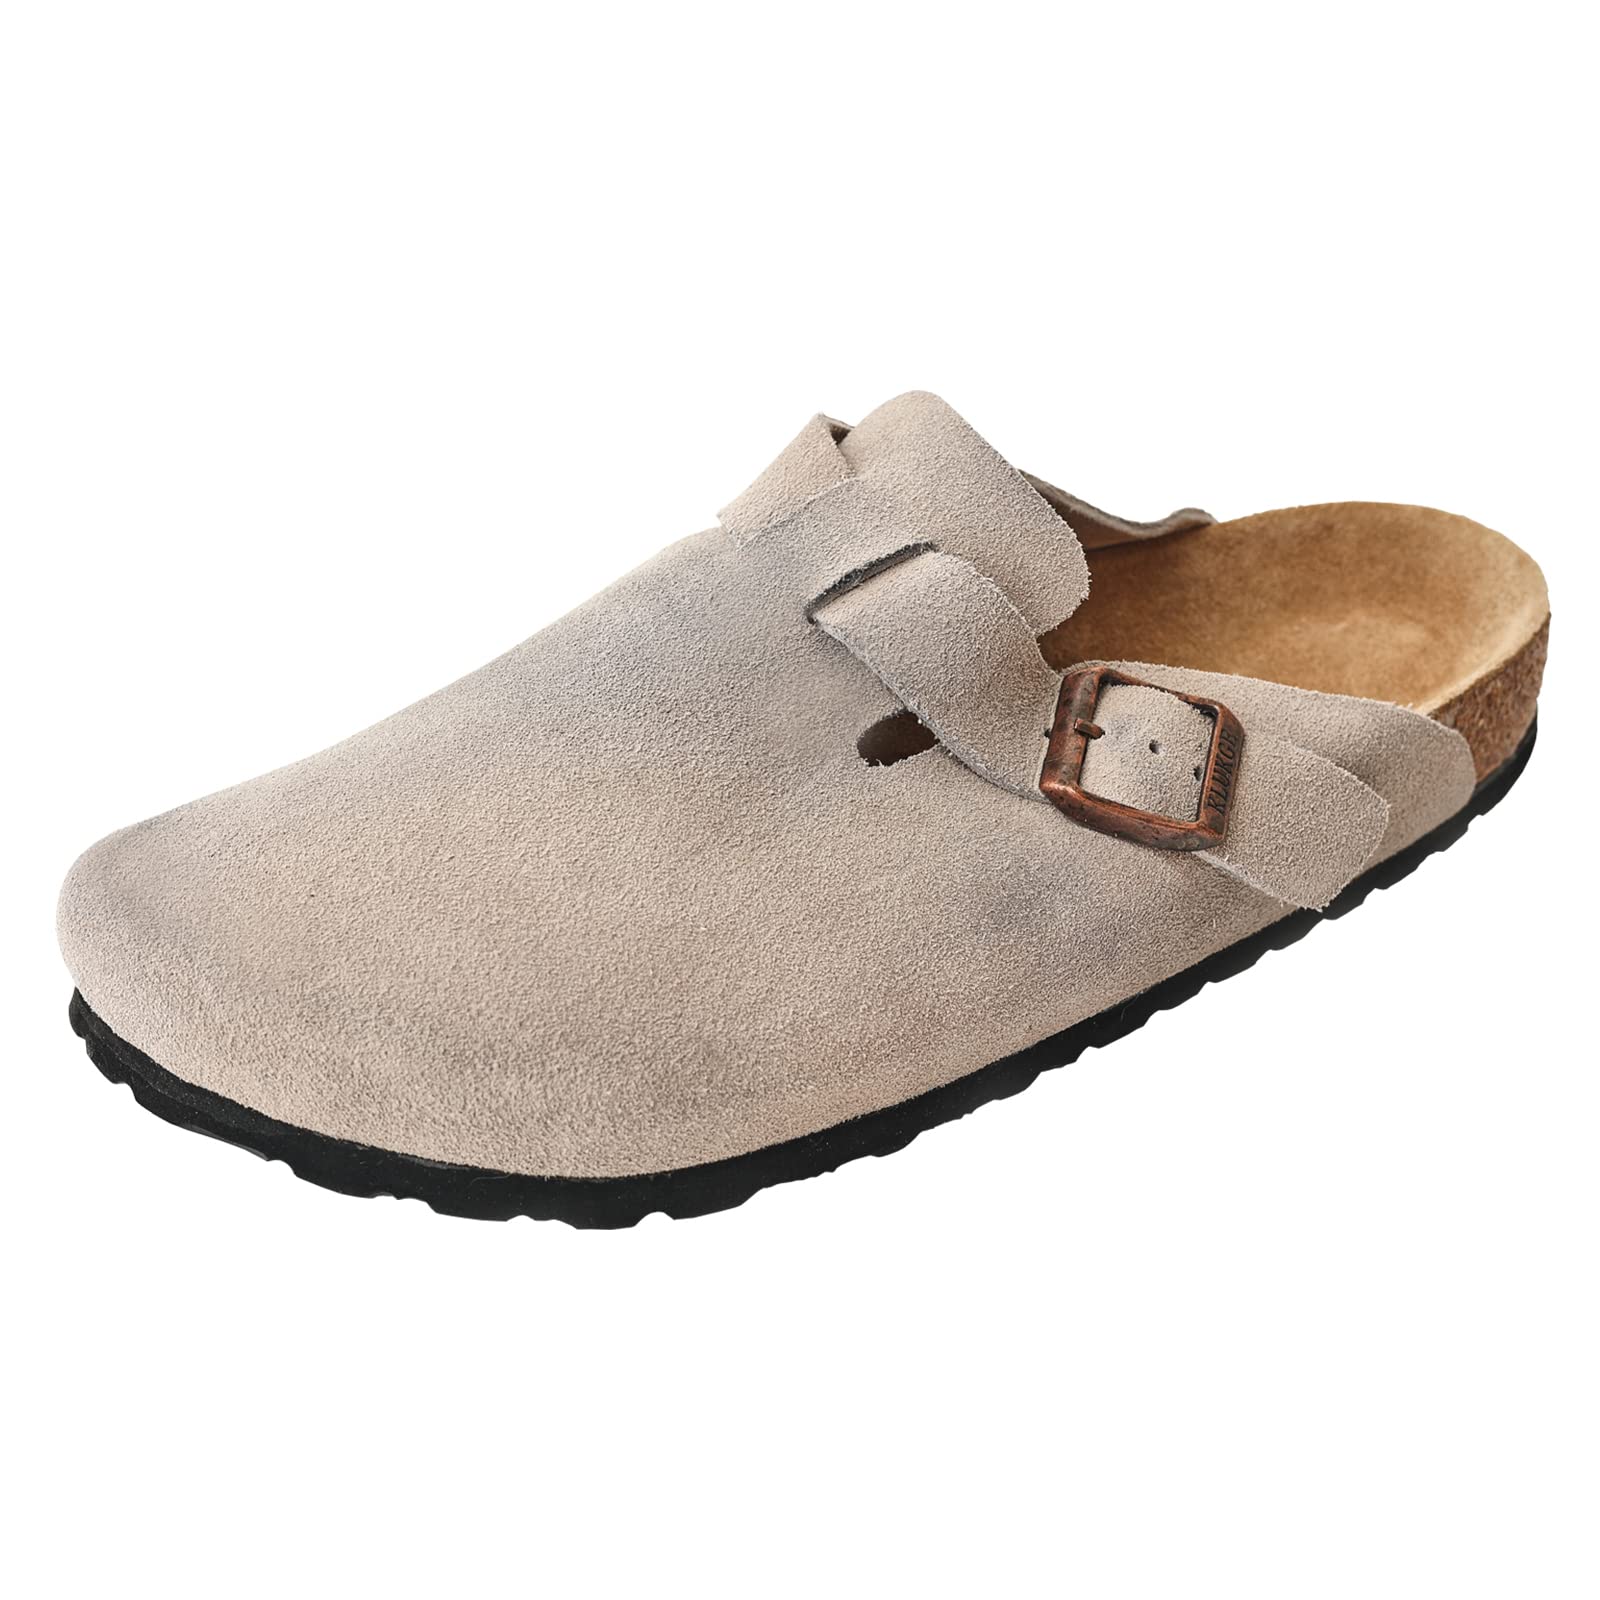 KLUKGE Boston Clogs for Men, Women‘s Suede Soft Leather Clogs with Arch Support and Adjustable Buckle Cork Footbed Non-Slip All Inclusive Single Shoes Unisex